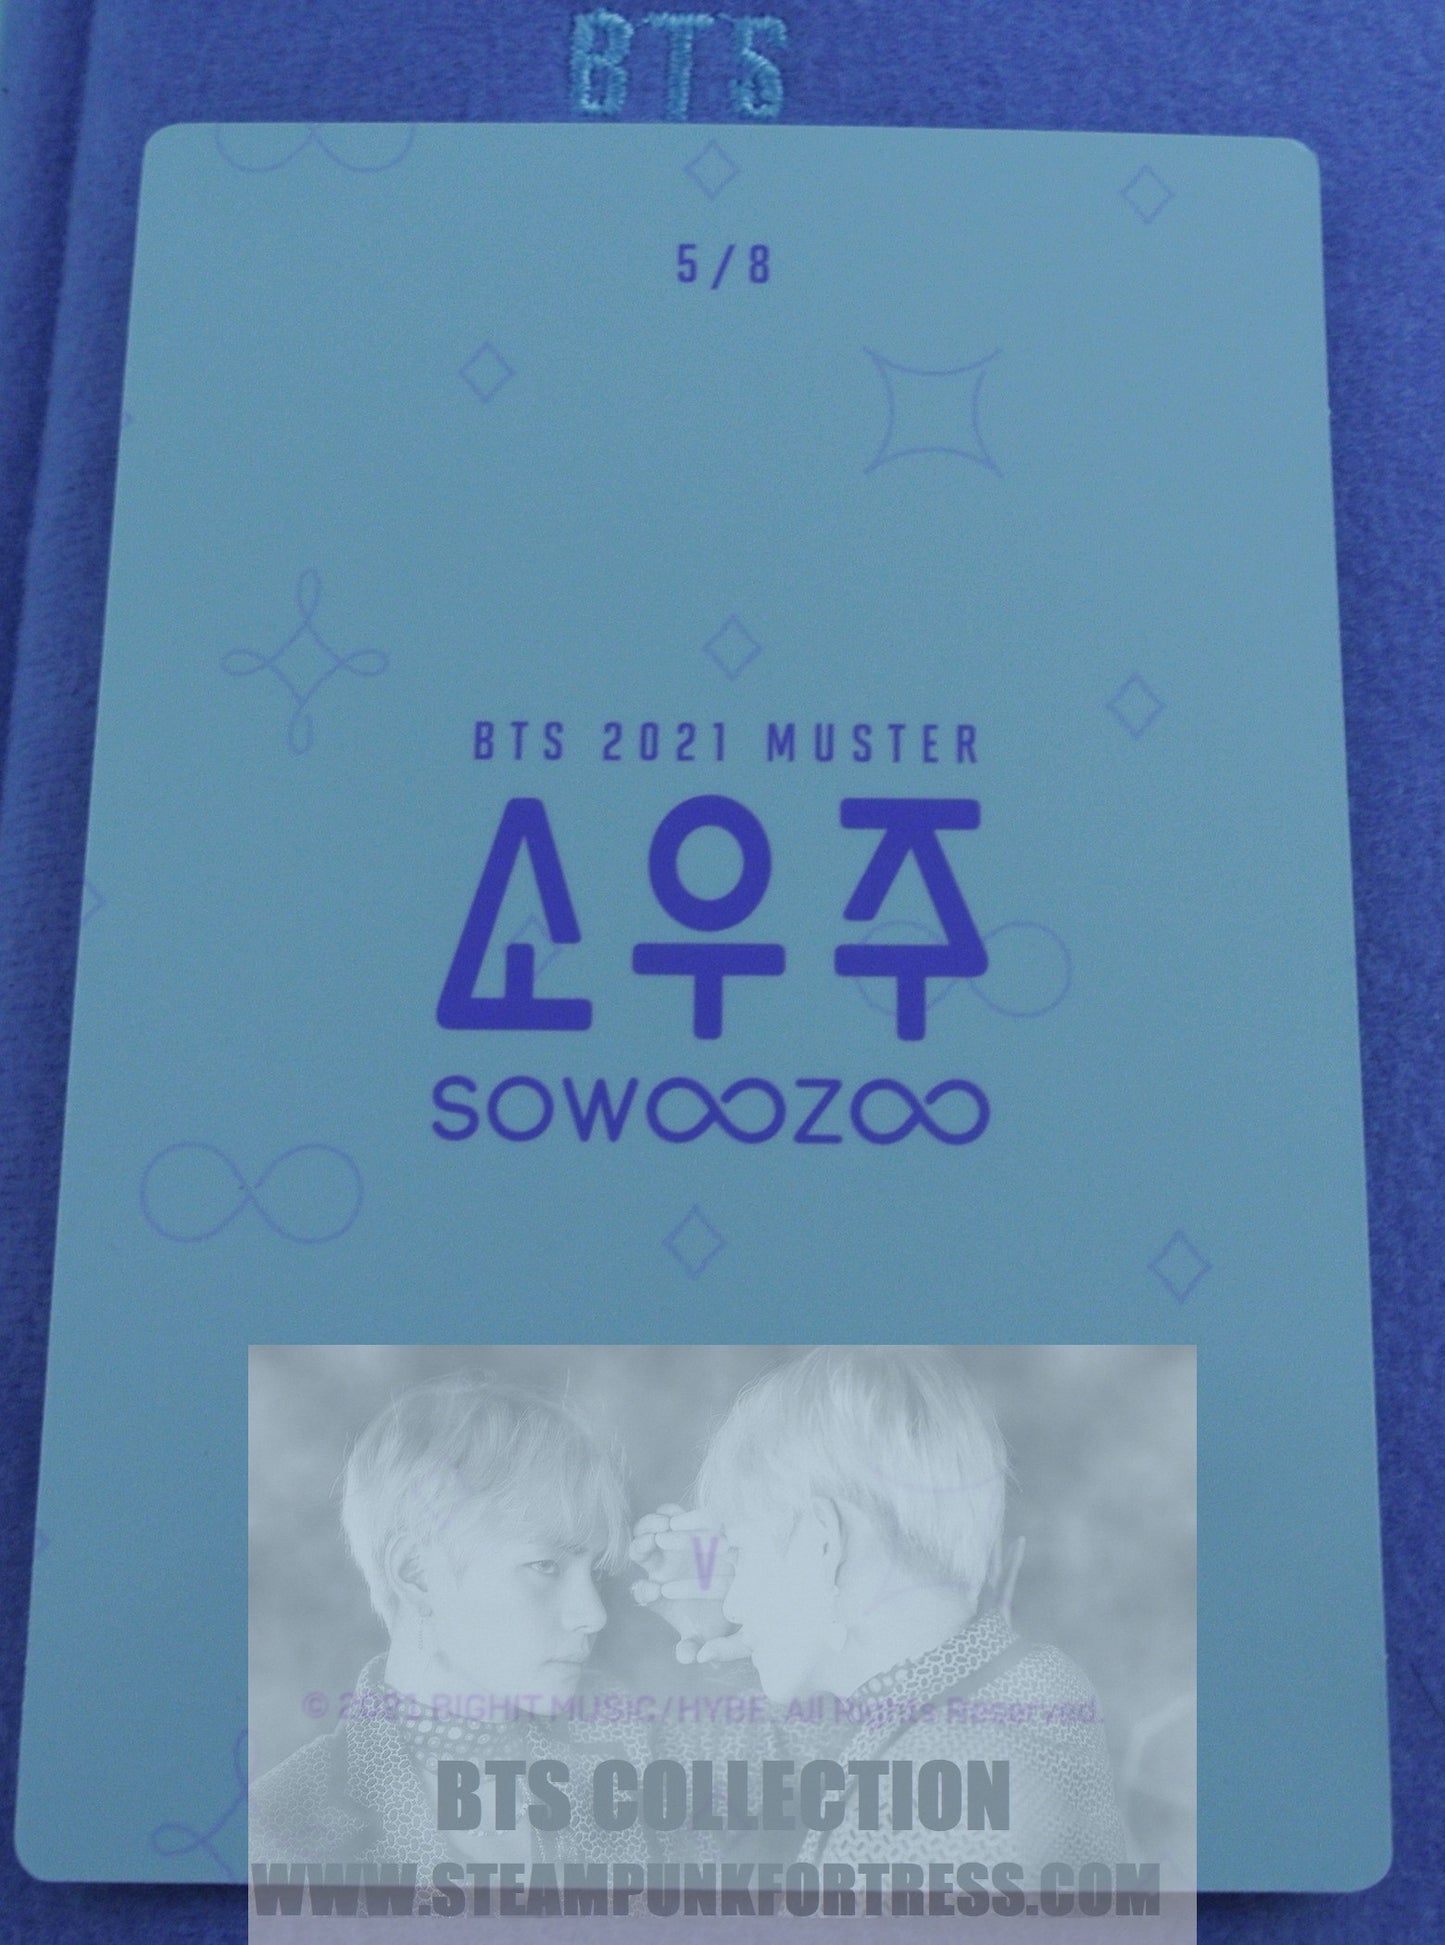 BTS V KIM TAEHYUNG TAE-HYUNG 2021 SOWOOZOO PHOTOCARD MUSTER PHOTO CARD #5 OF 8 NEW OFFICIAL MERCHANDISE